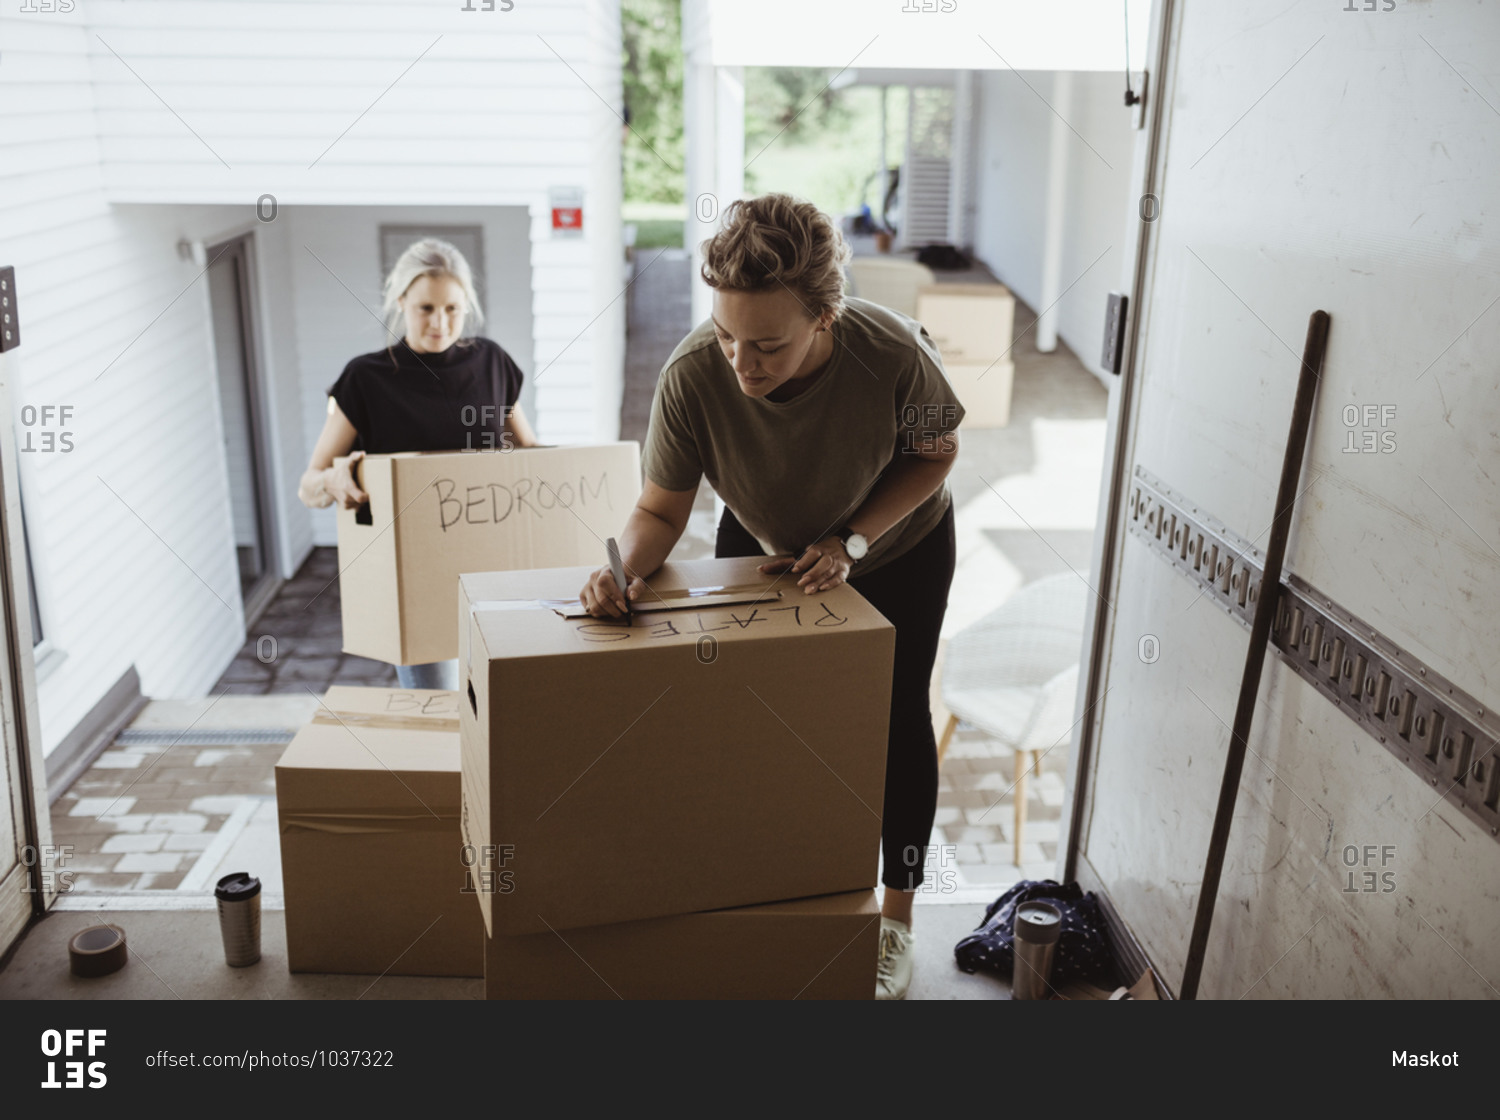 Woman holding box while female writing on cardboard box in moving van